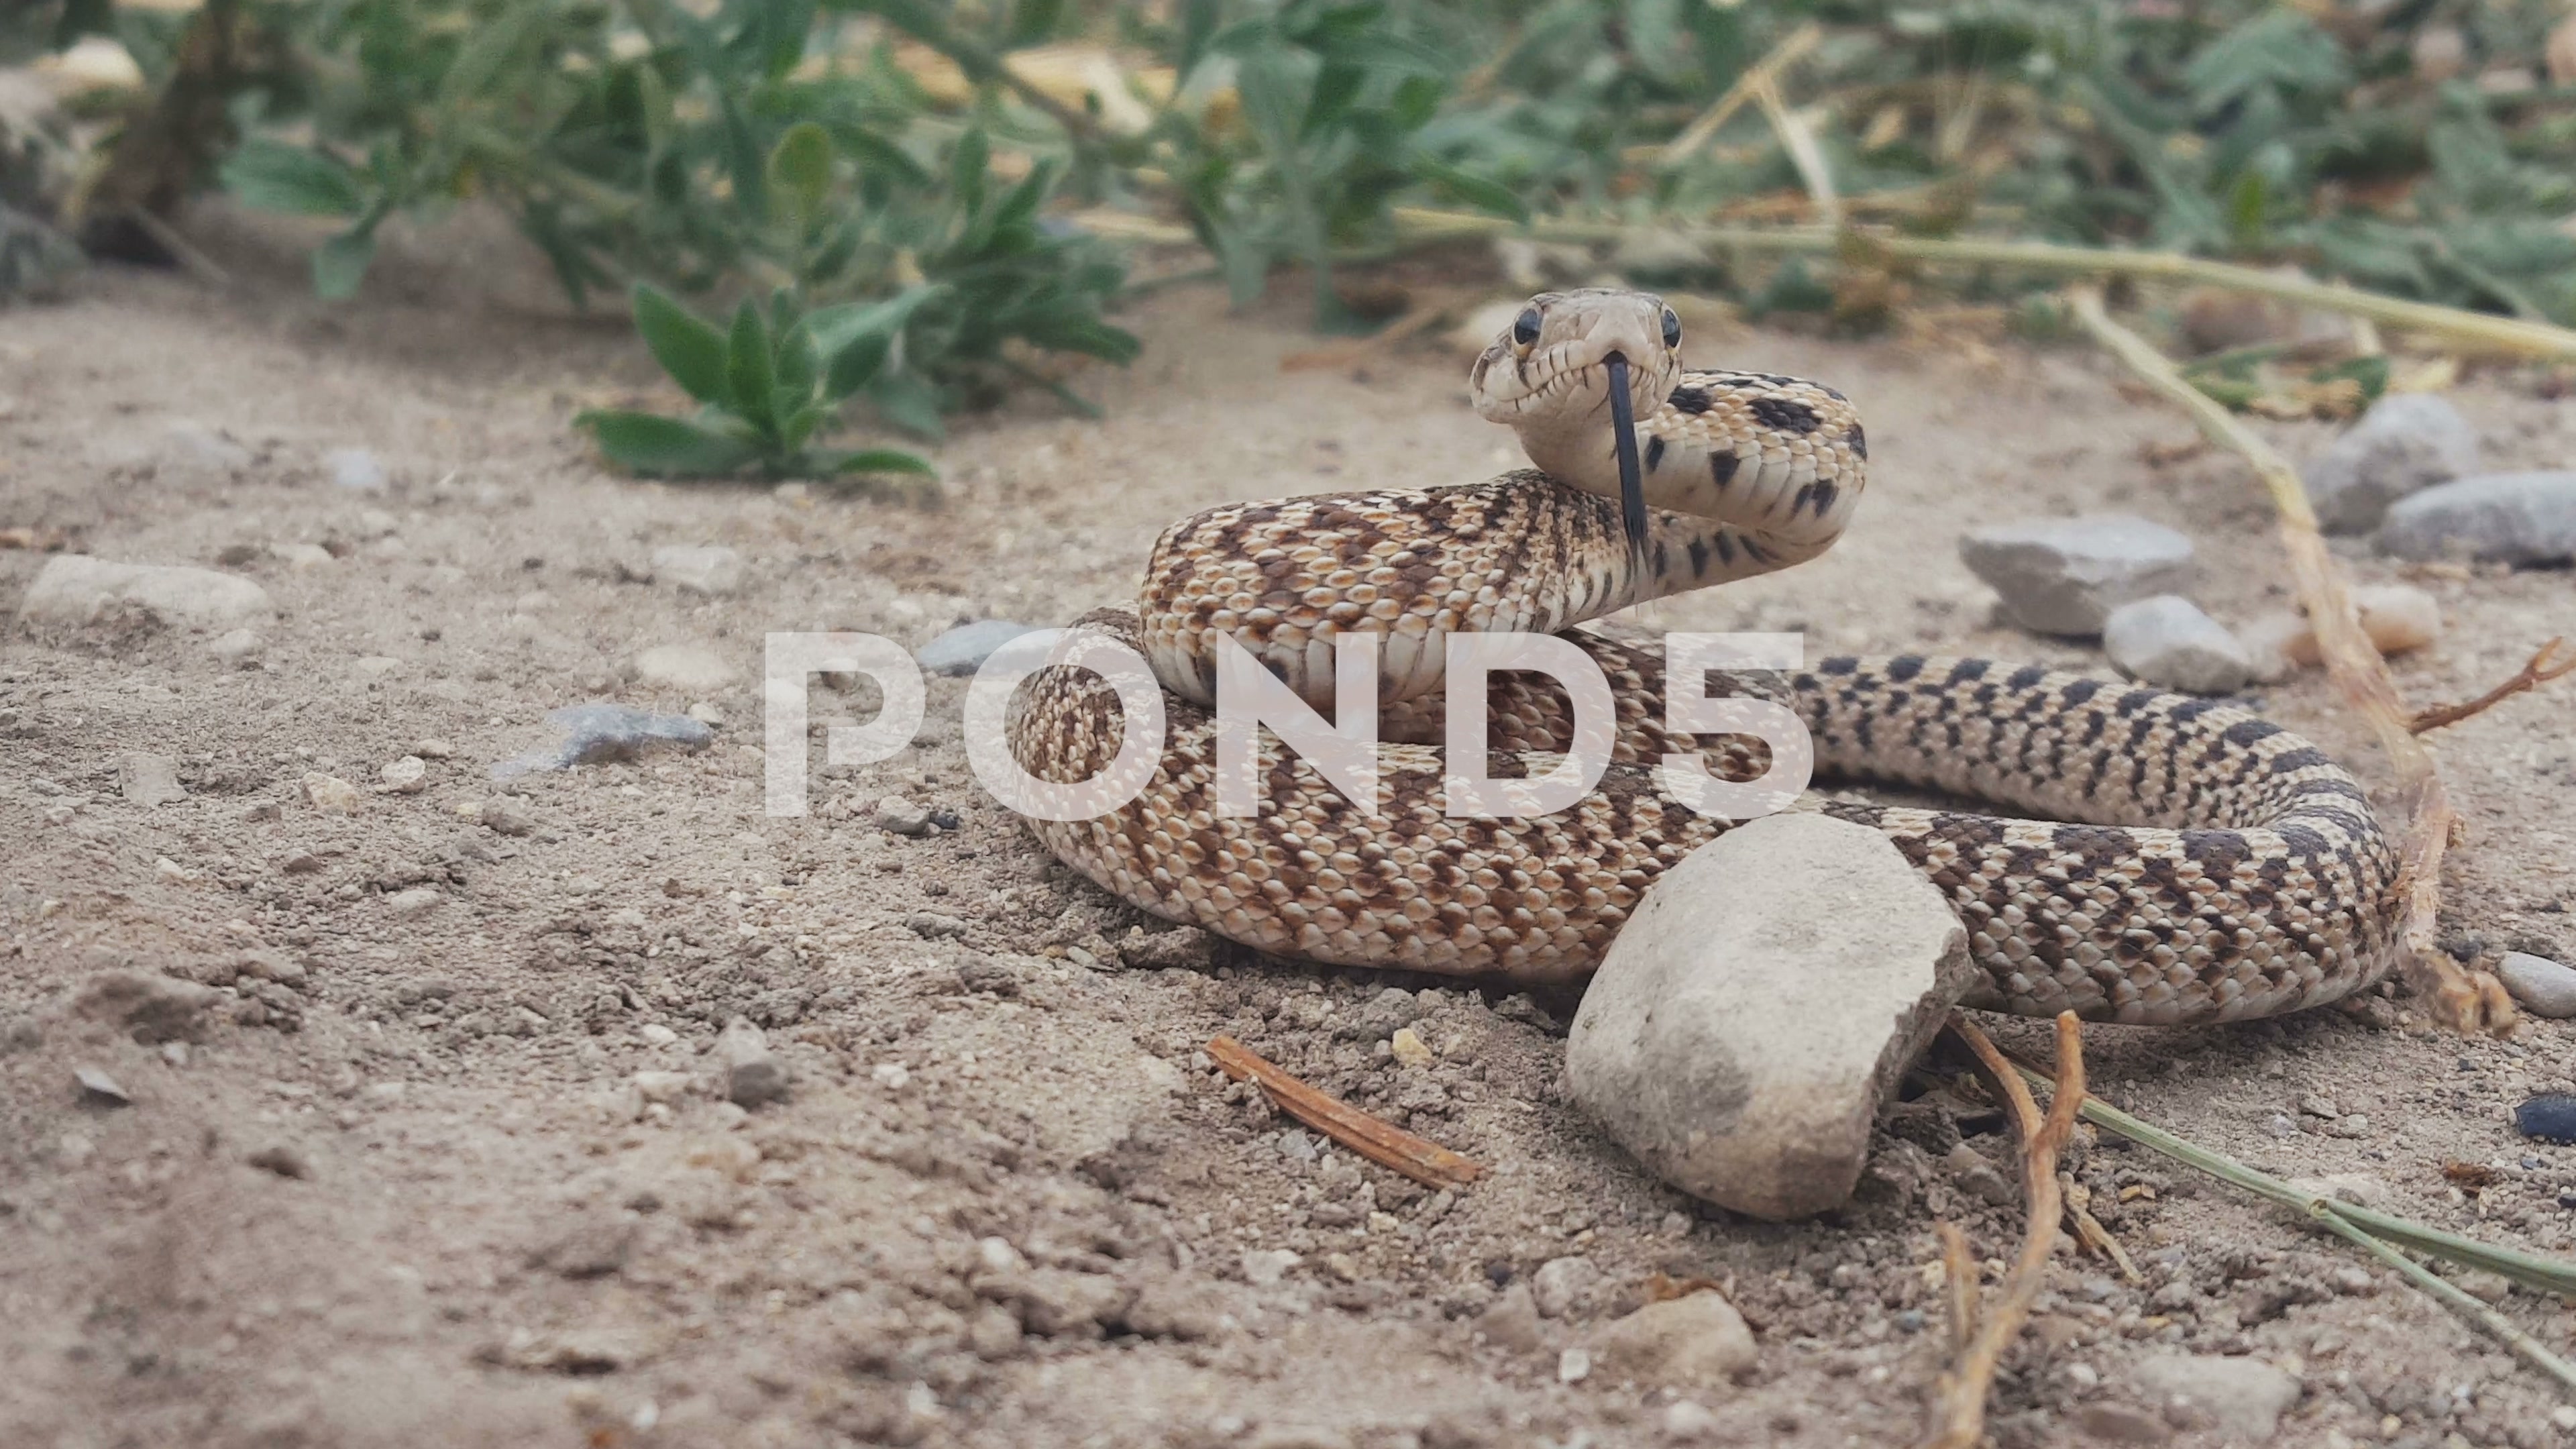 Video: Great Basin Gopher snake coils up and turns around - Closeup ...